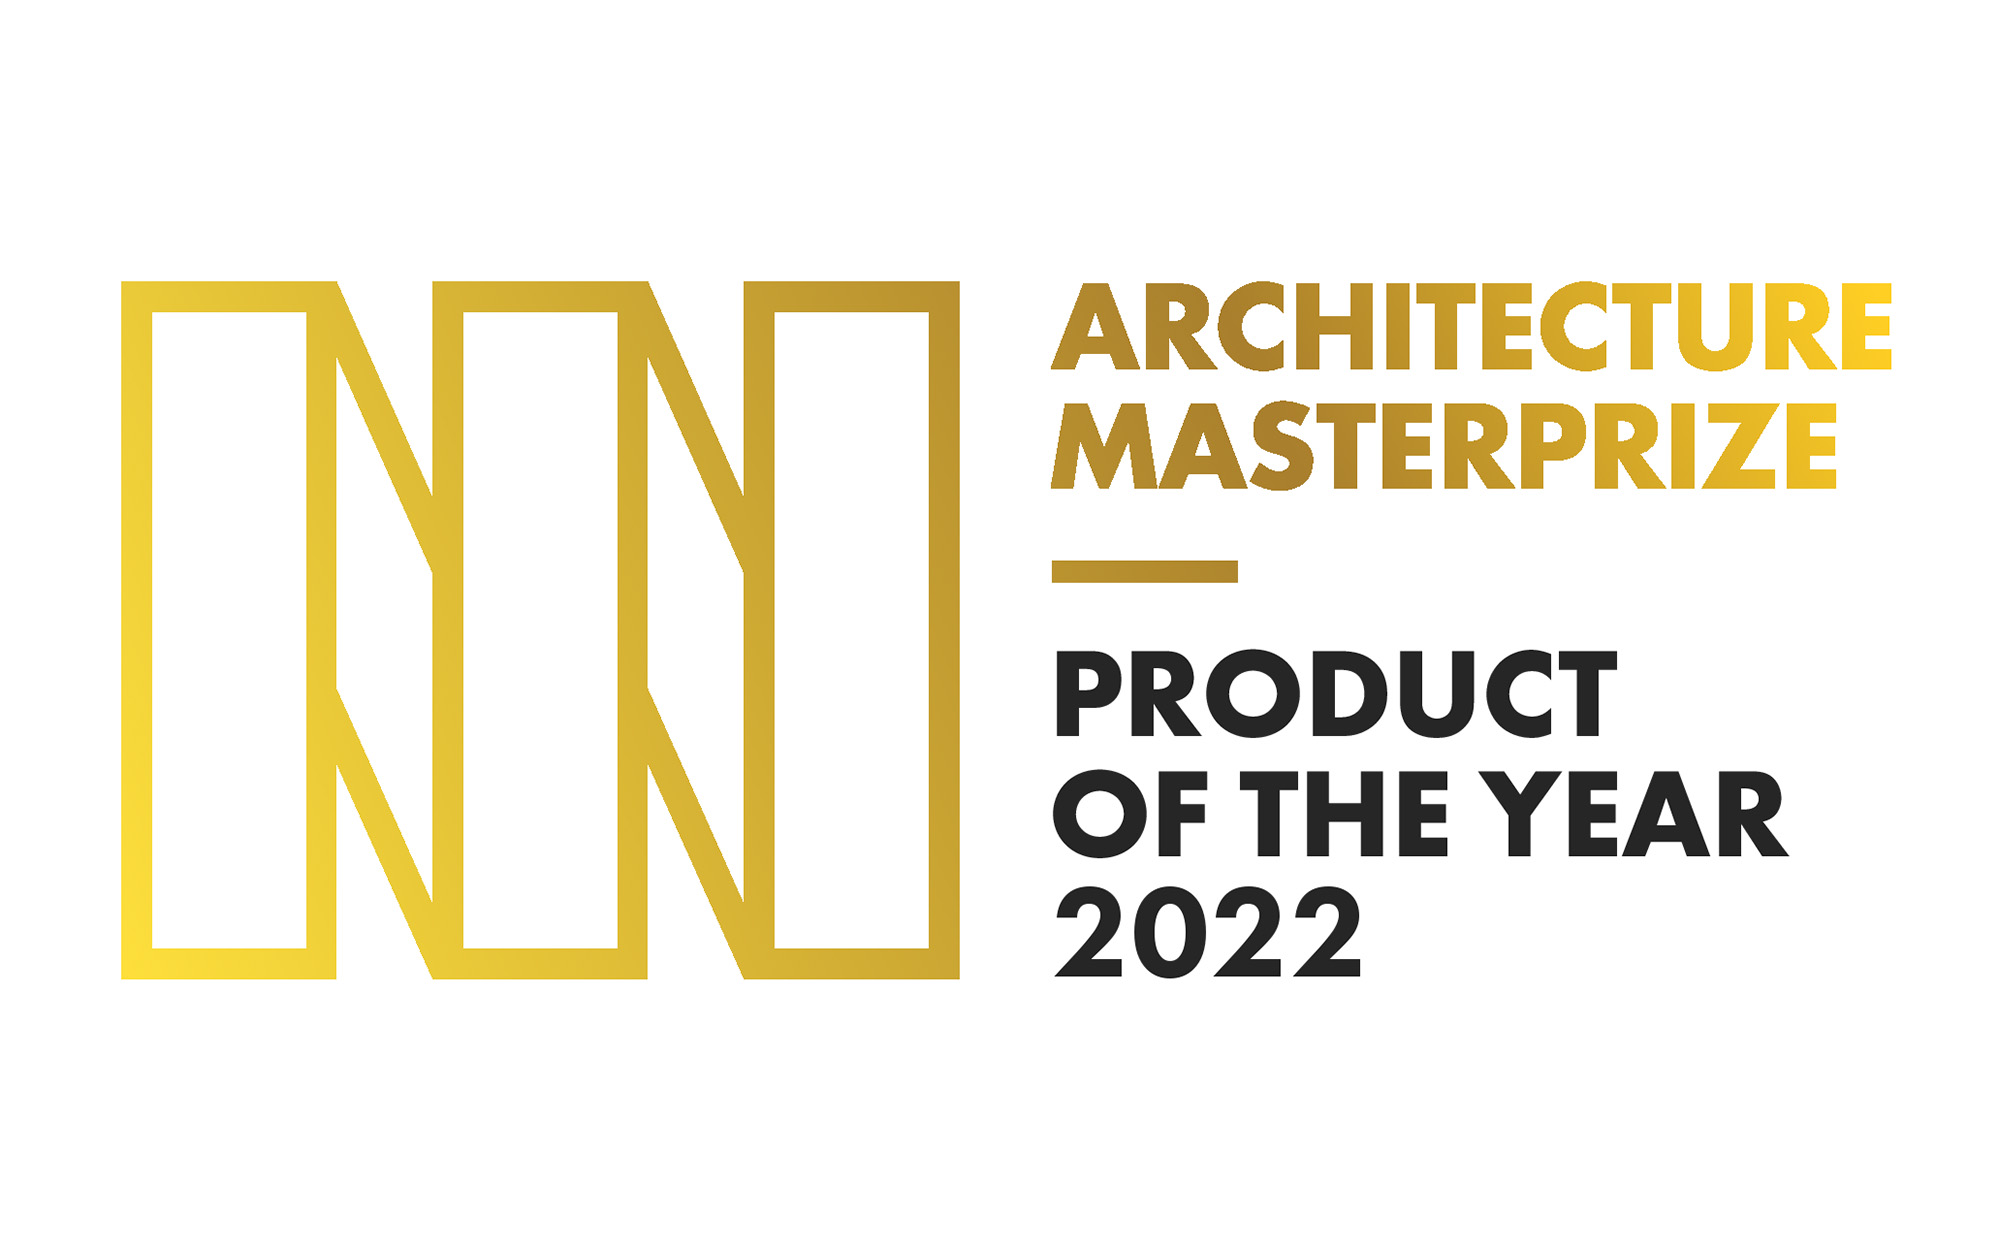 ENVELON Architecture MasterPrize Product of the year